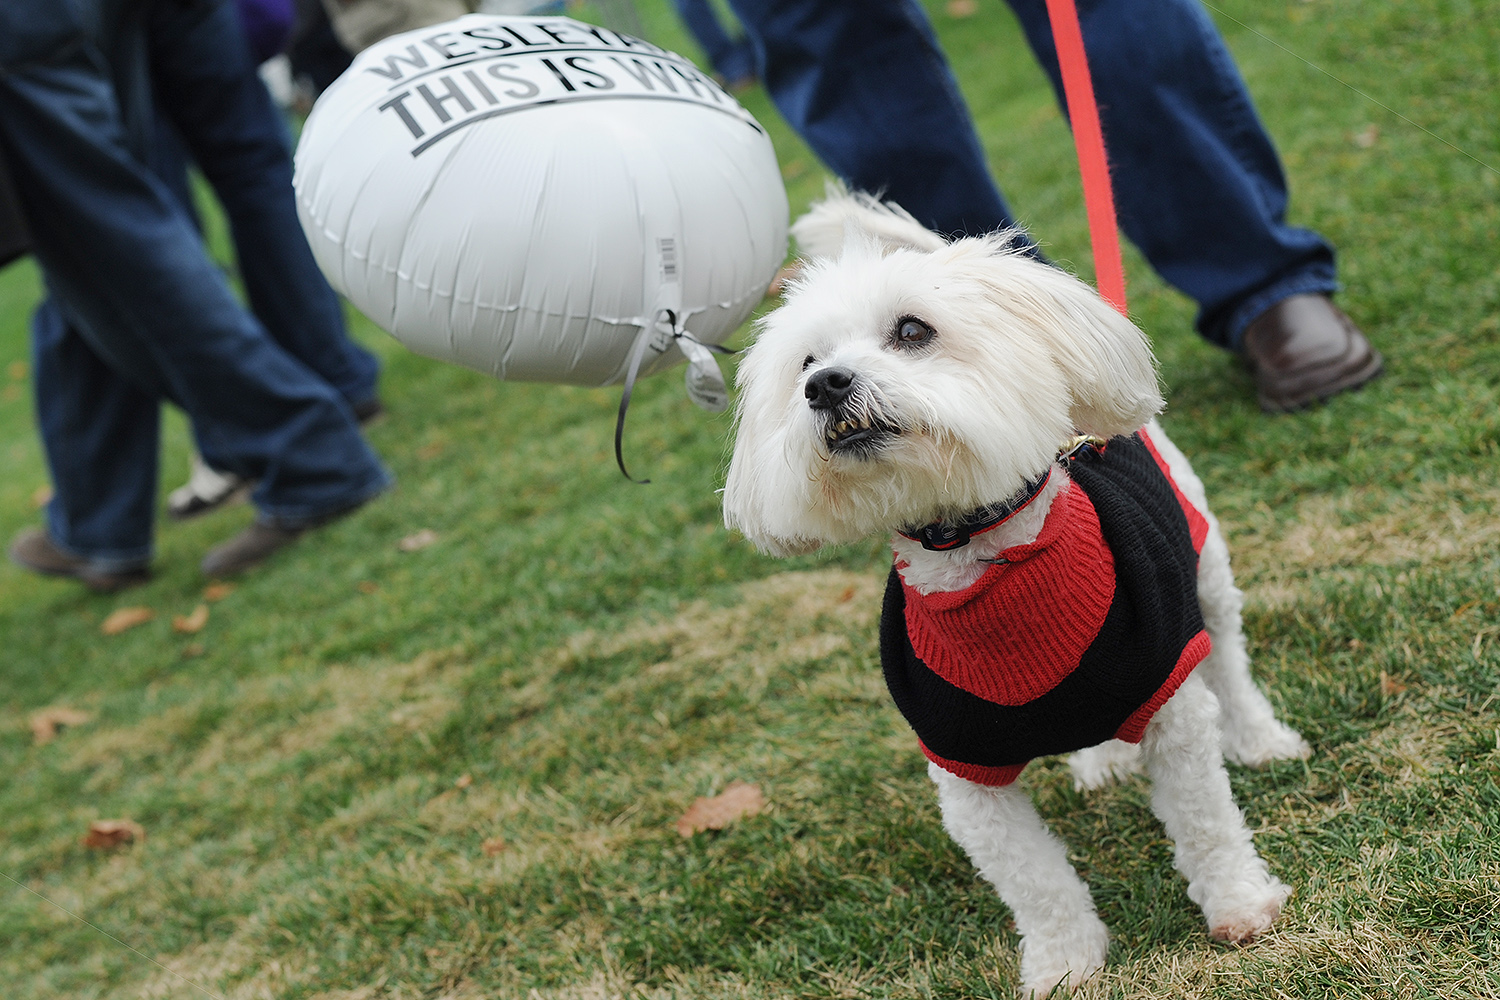 Dozens of furry friends also attended Homecoming/Family Weekend at Wesleyan. (Photo by Olivia Drake MALS '08)